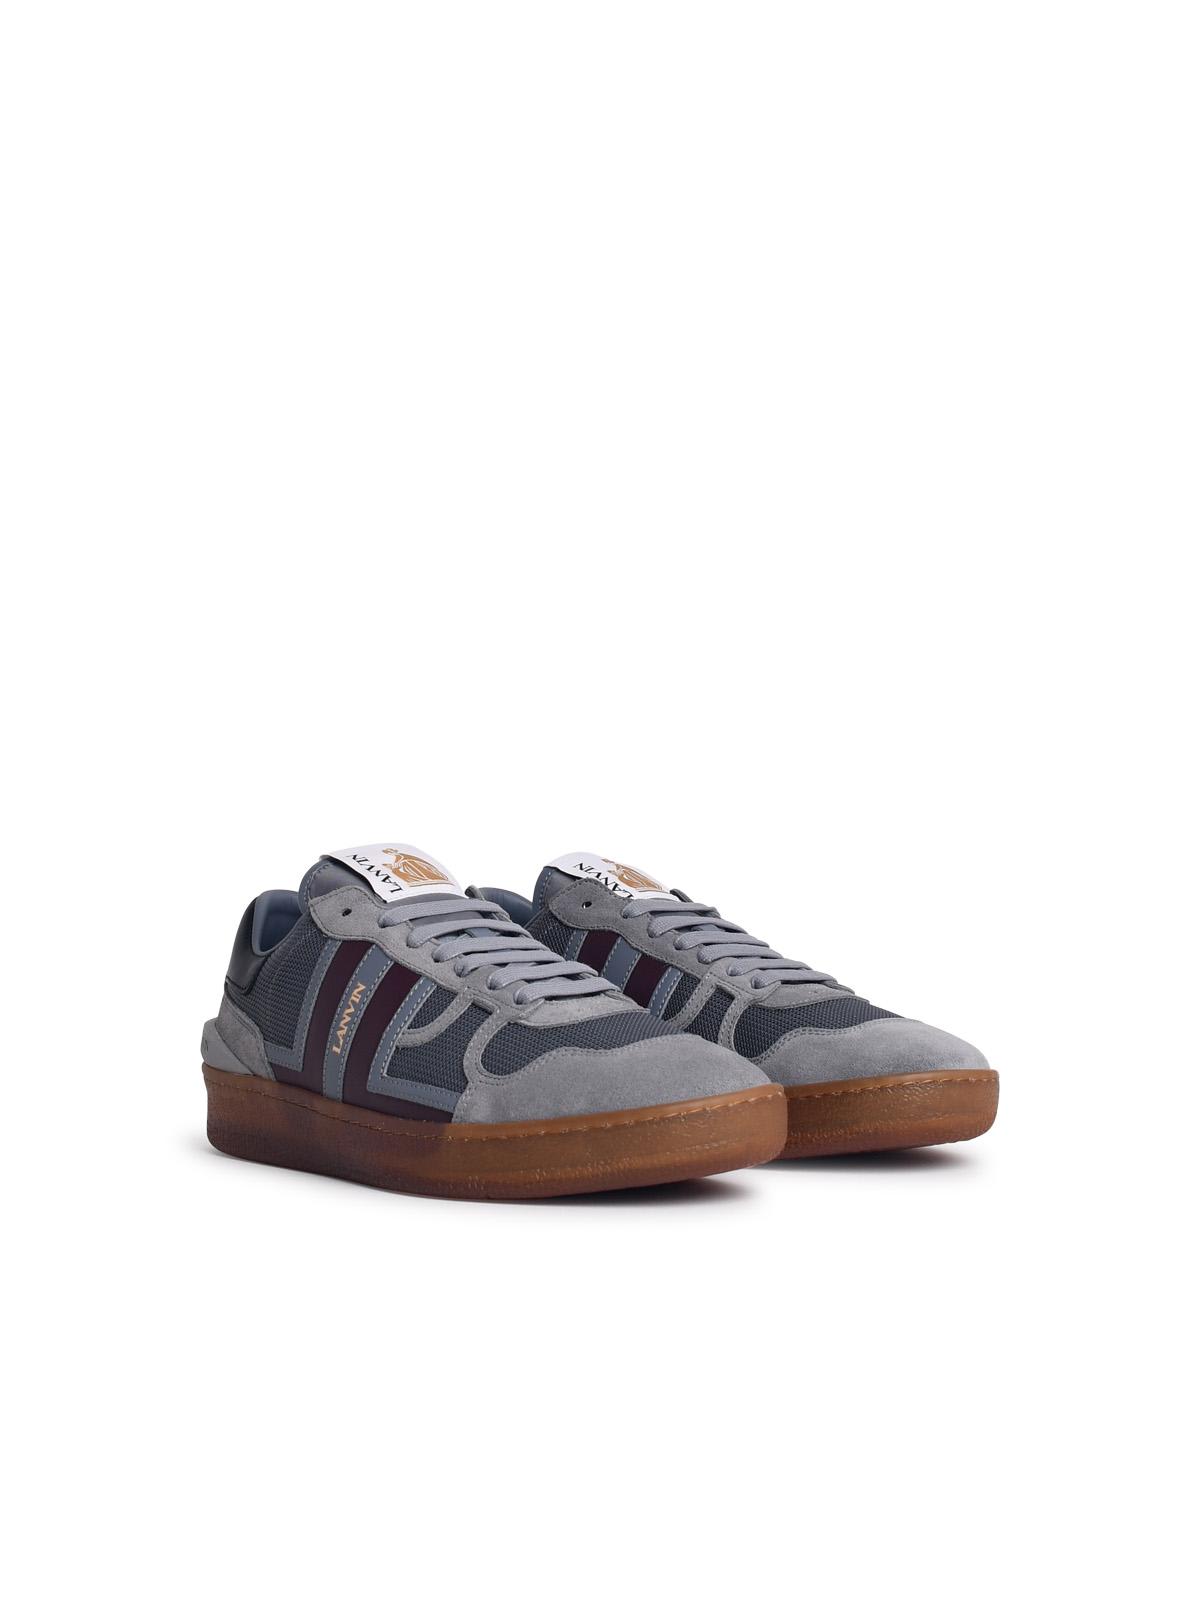 Lanvin Clay Grey Leather Blend Sneakers